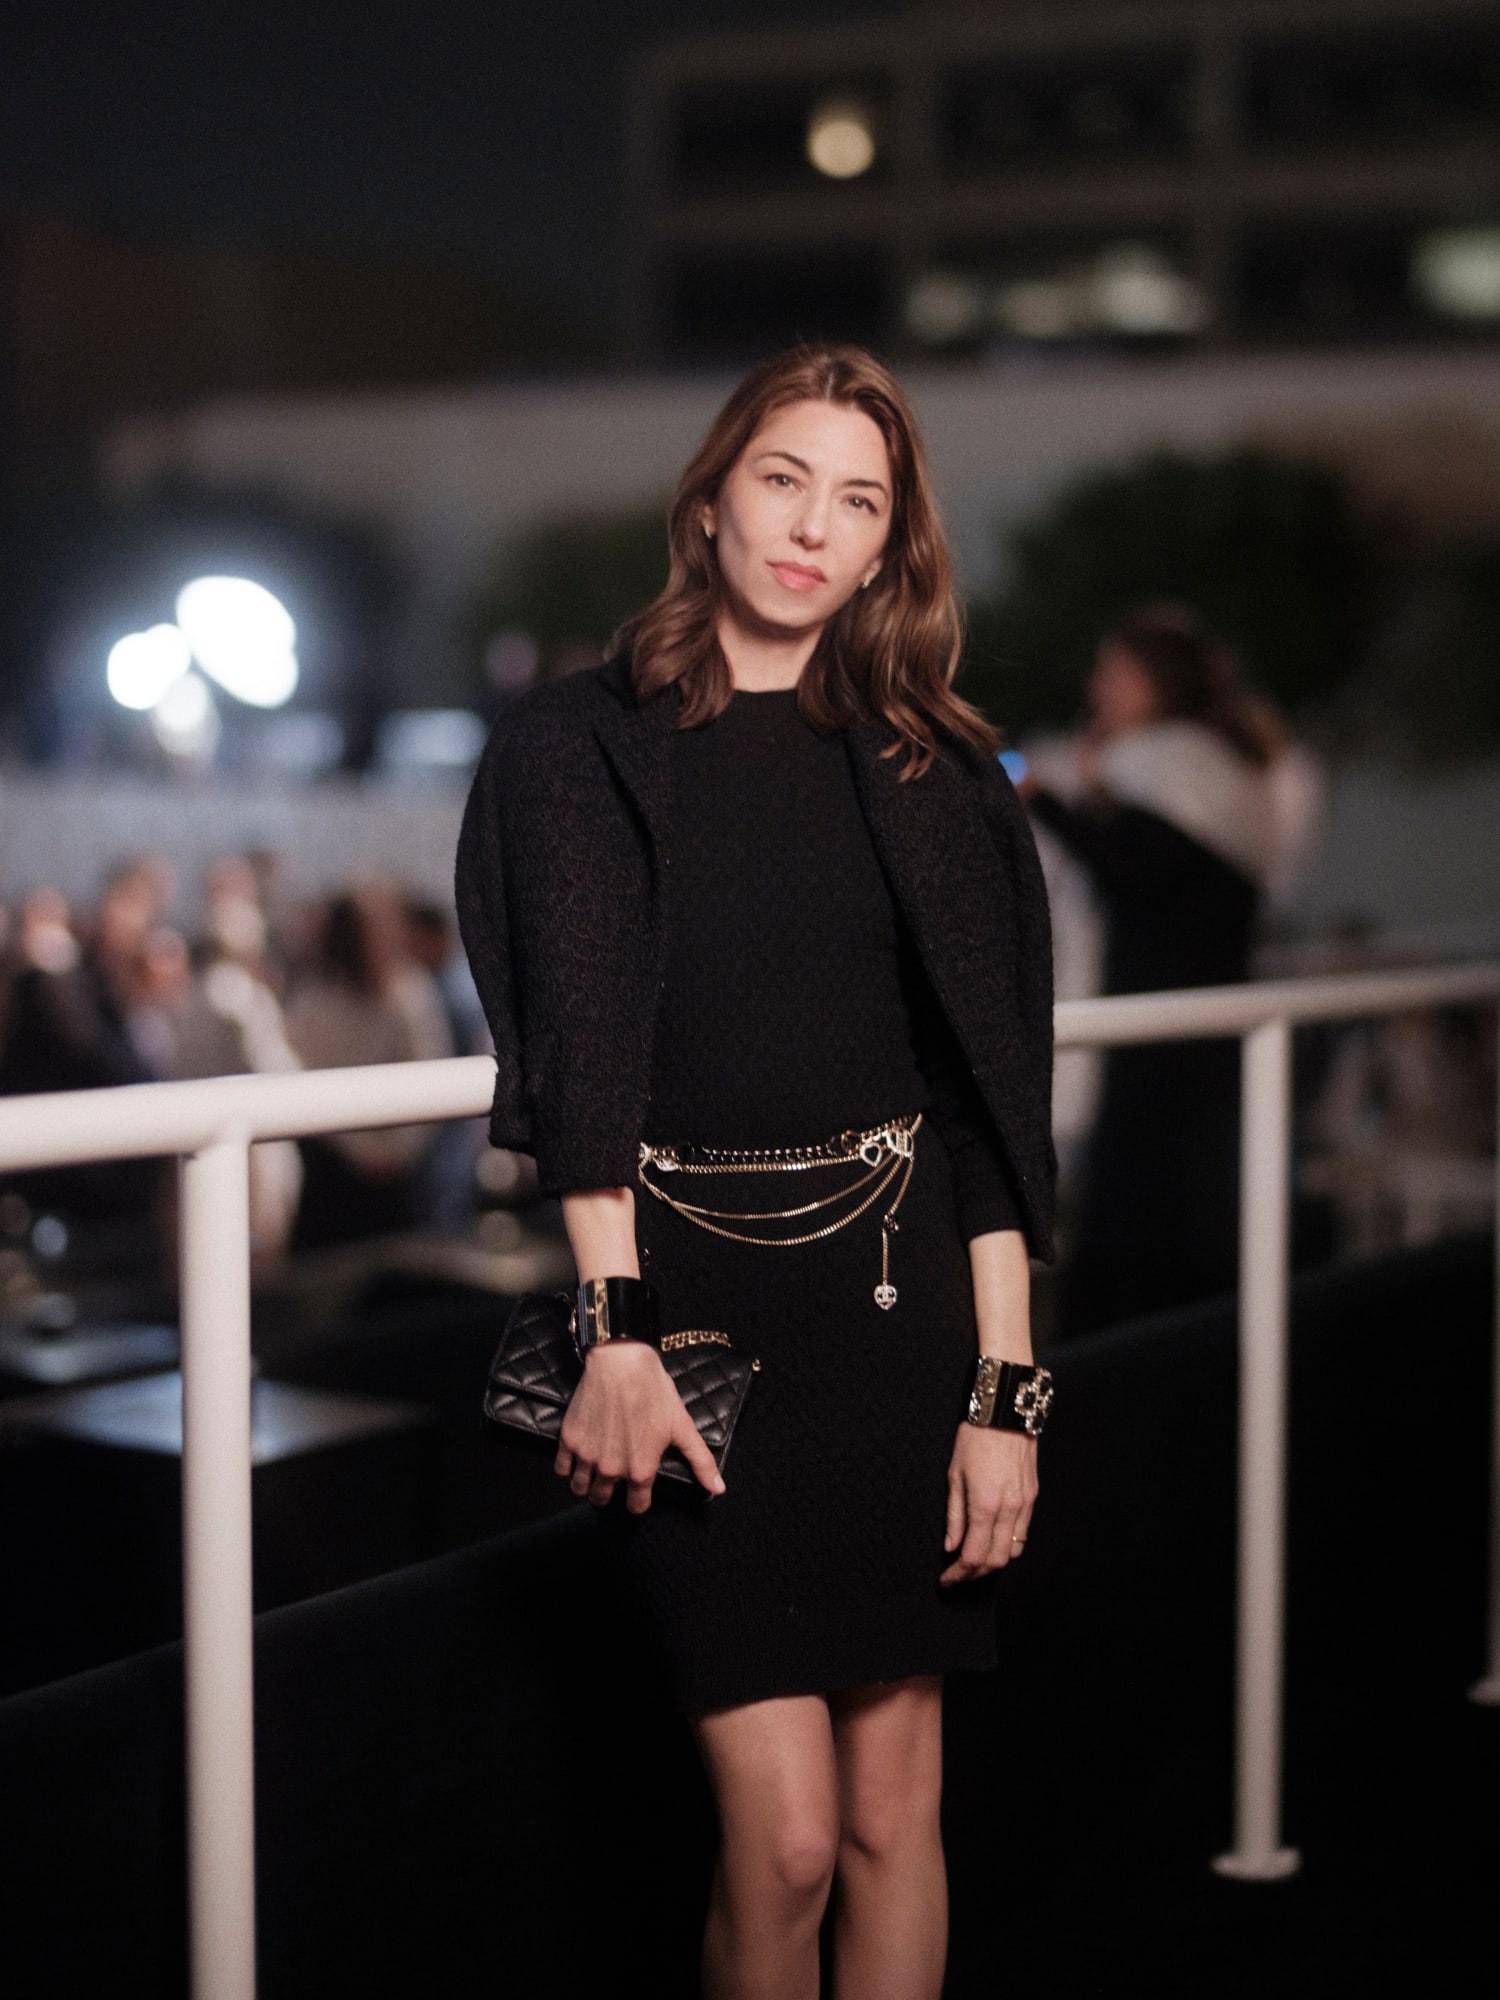 The Celebrities Were In Style At The Chanel Cruise 2024 Show.